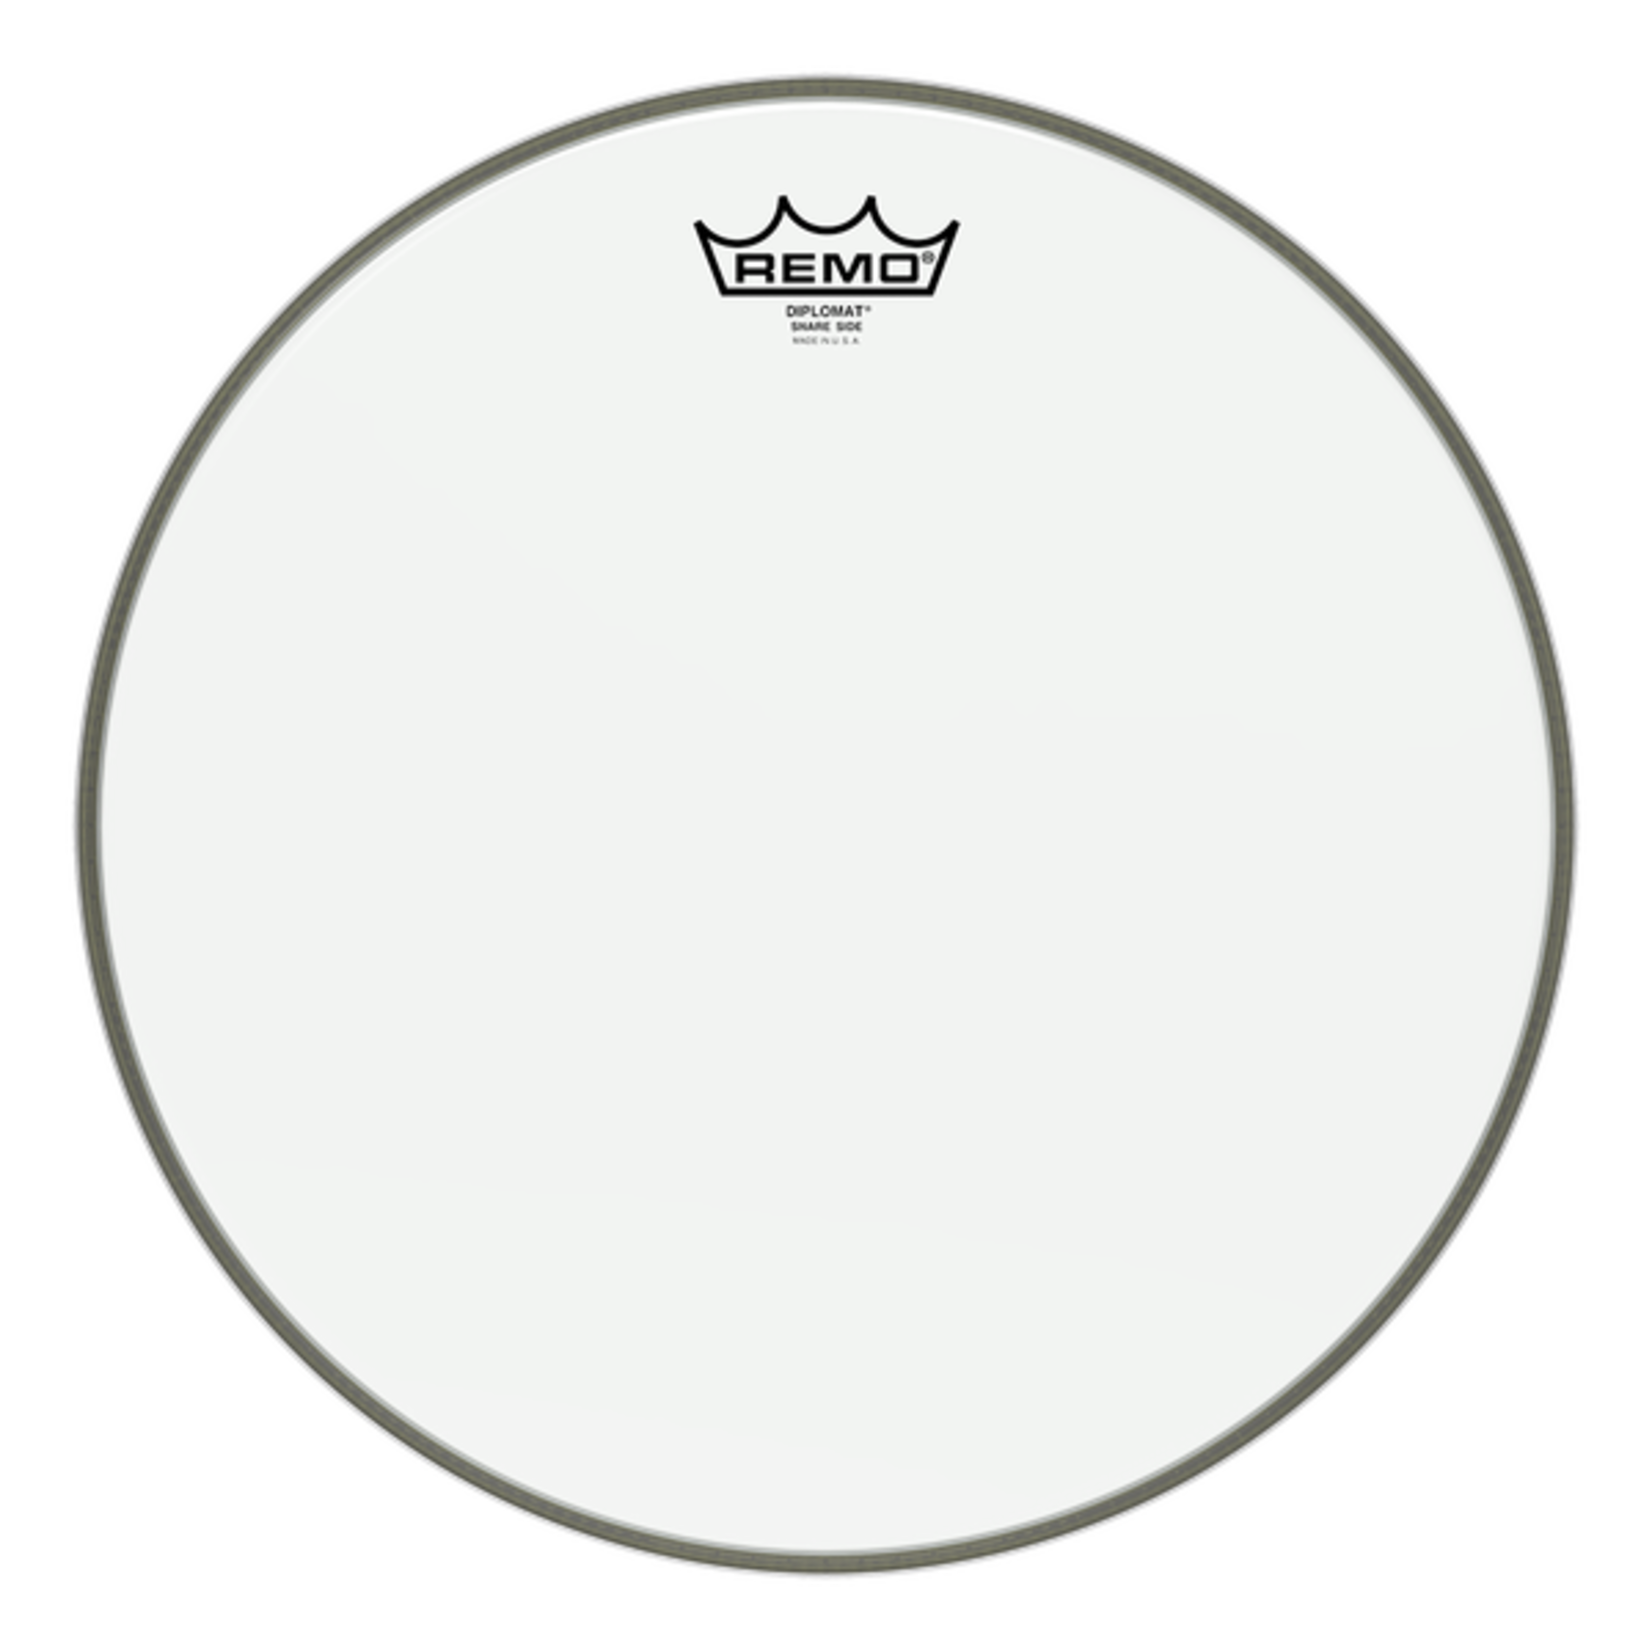 Remo Remo 14" Snare Side Diplomat Hazy Drumhead SD0114